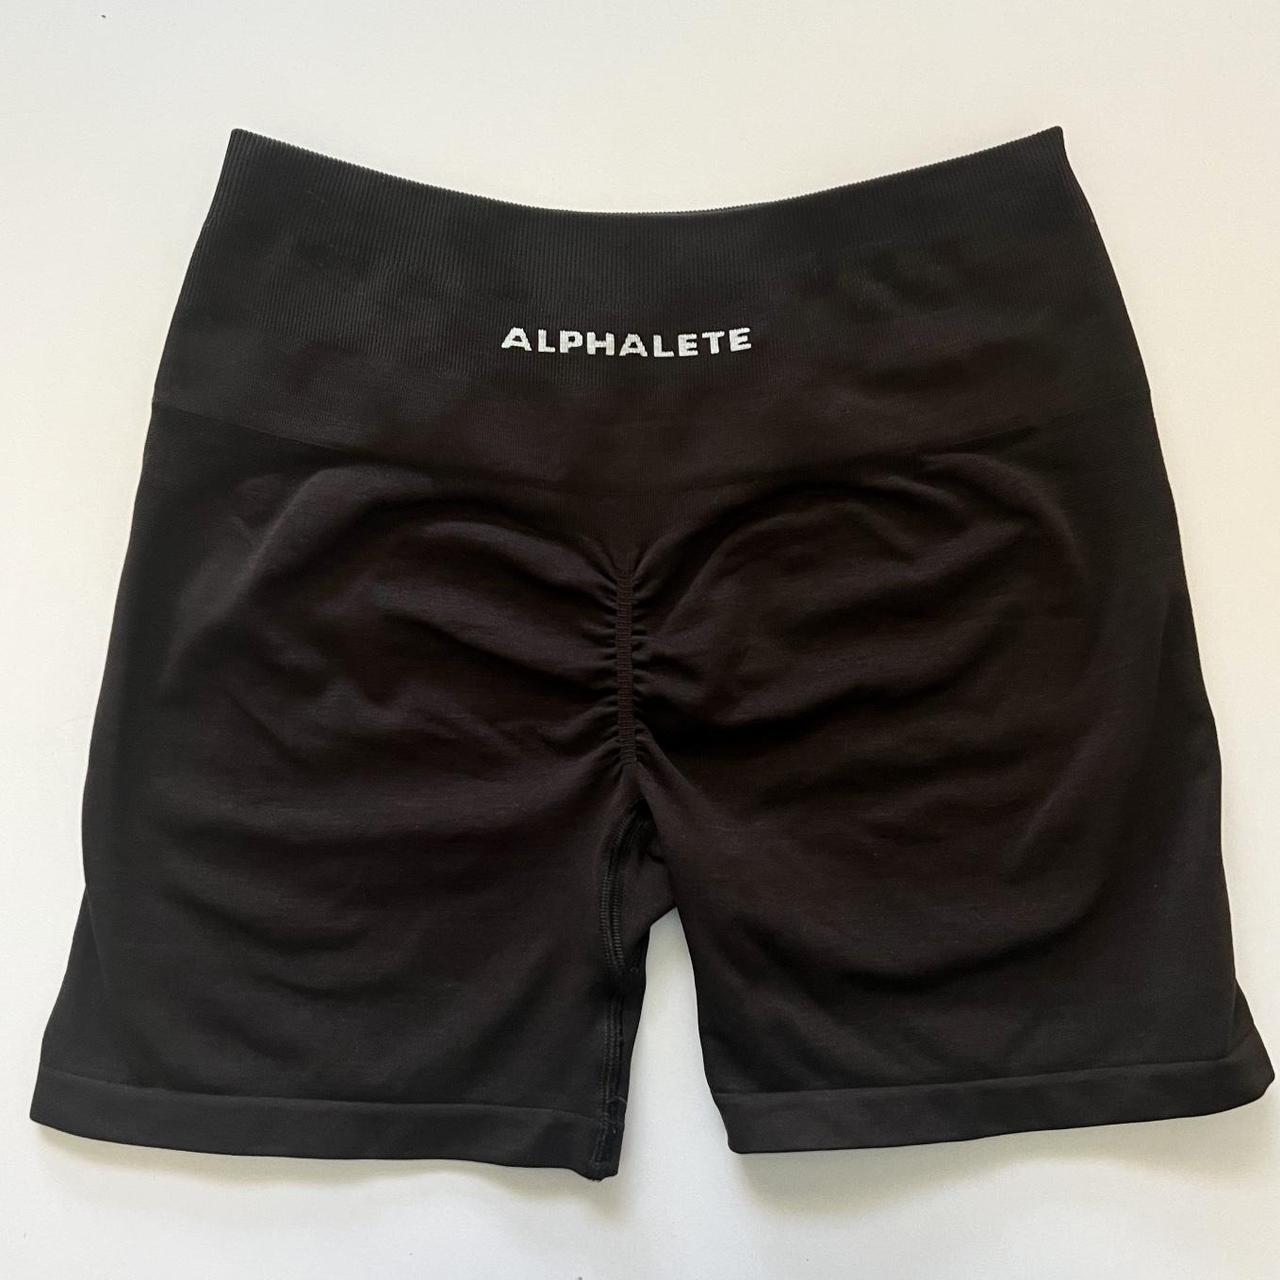 Alphalete Amplify Shorts Black - $40 (27% Off Retail) - From Hope